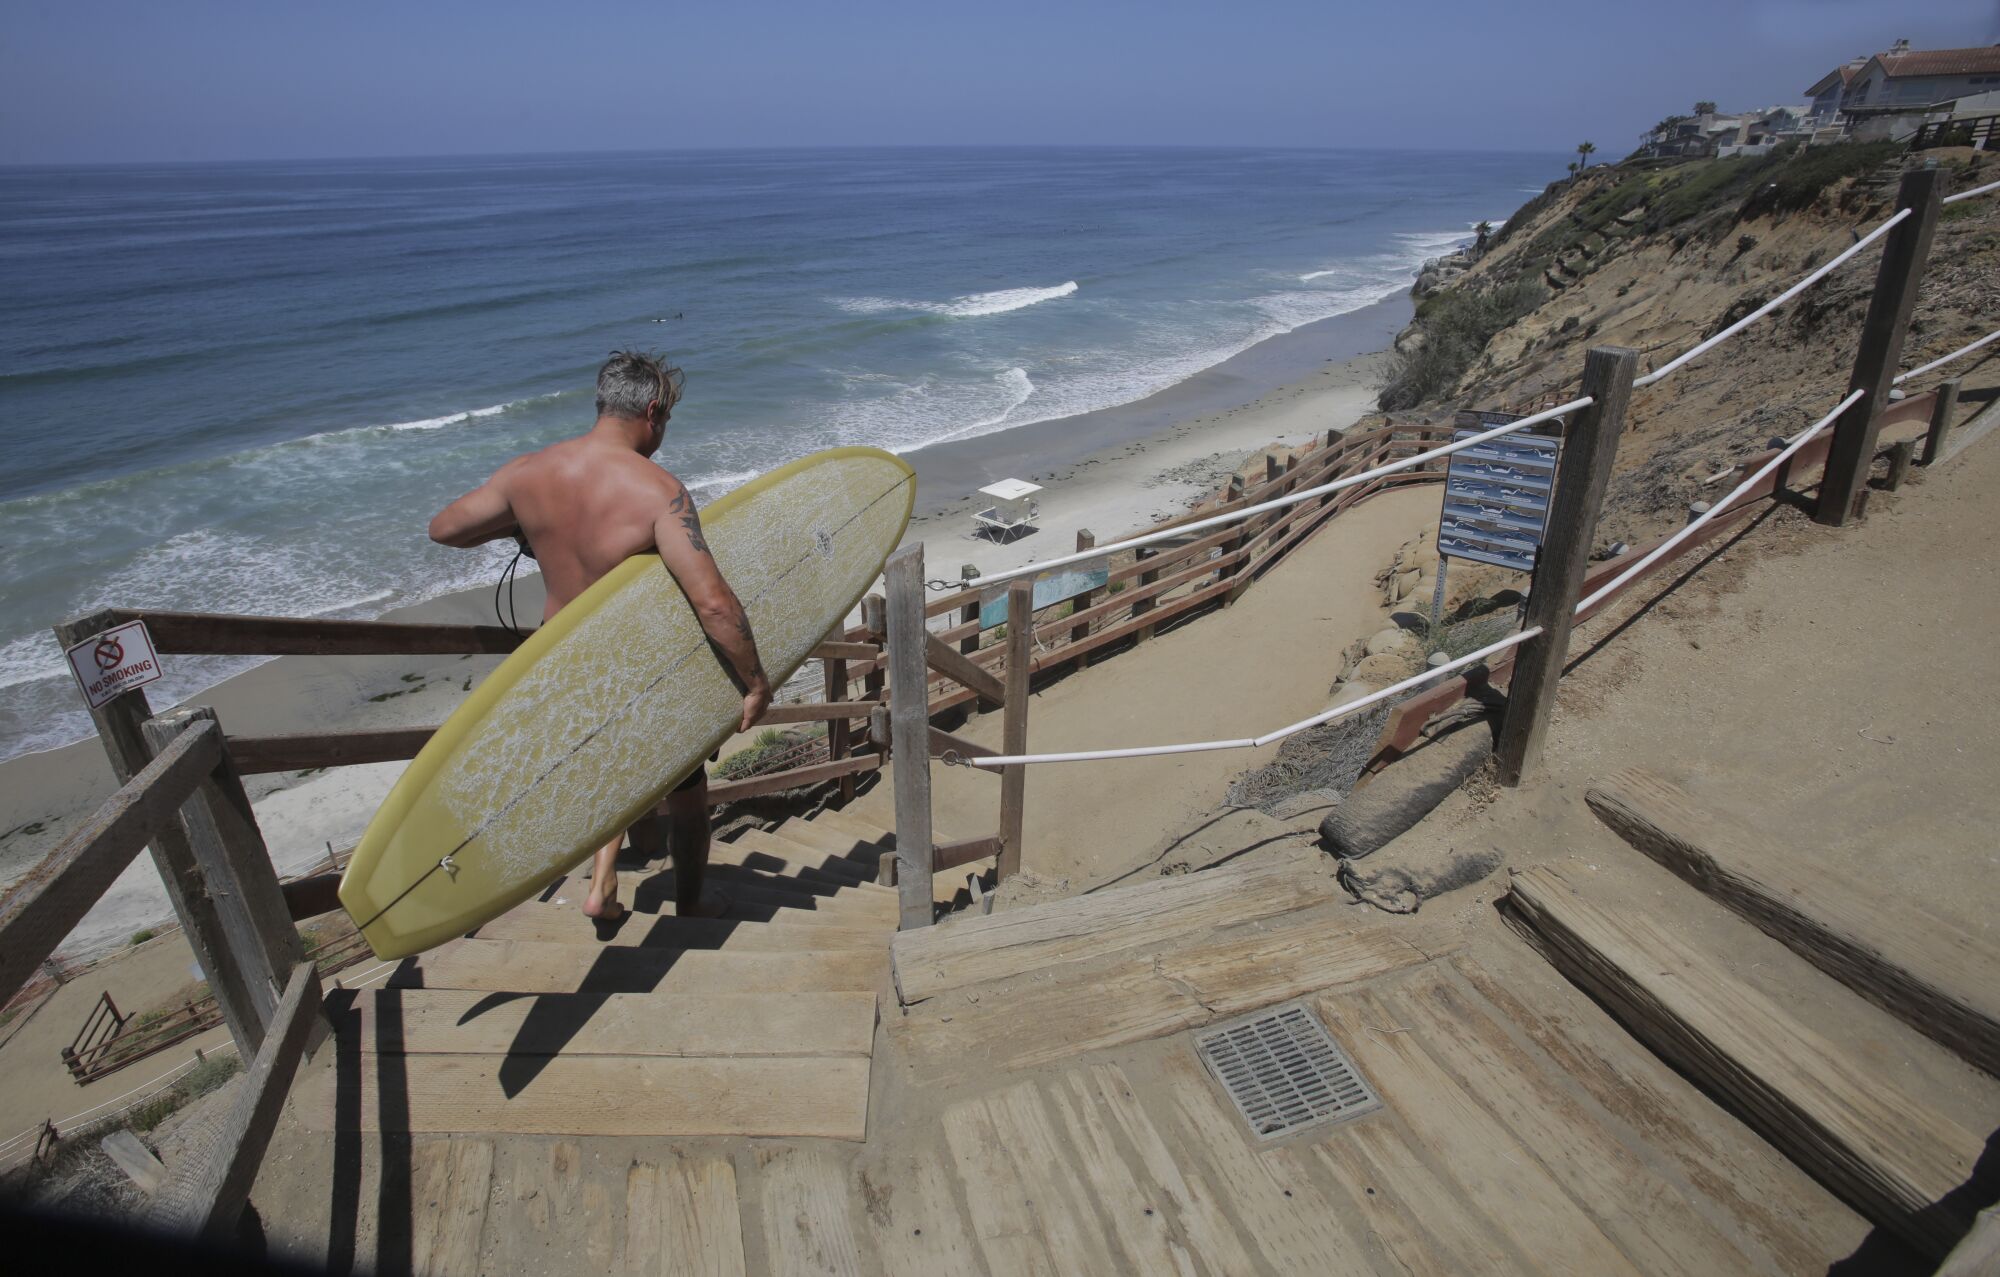 A surfer, one of the first of the day, uses the stairs down to Beacon's Beach in Encinitas, CA.